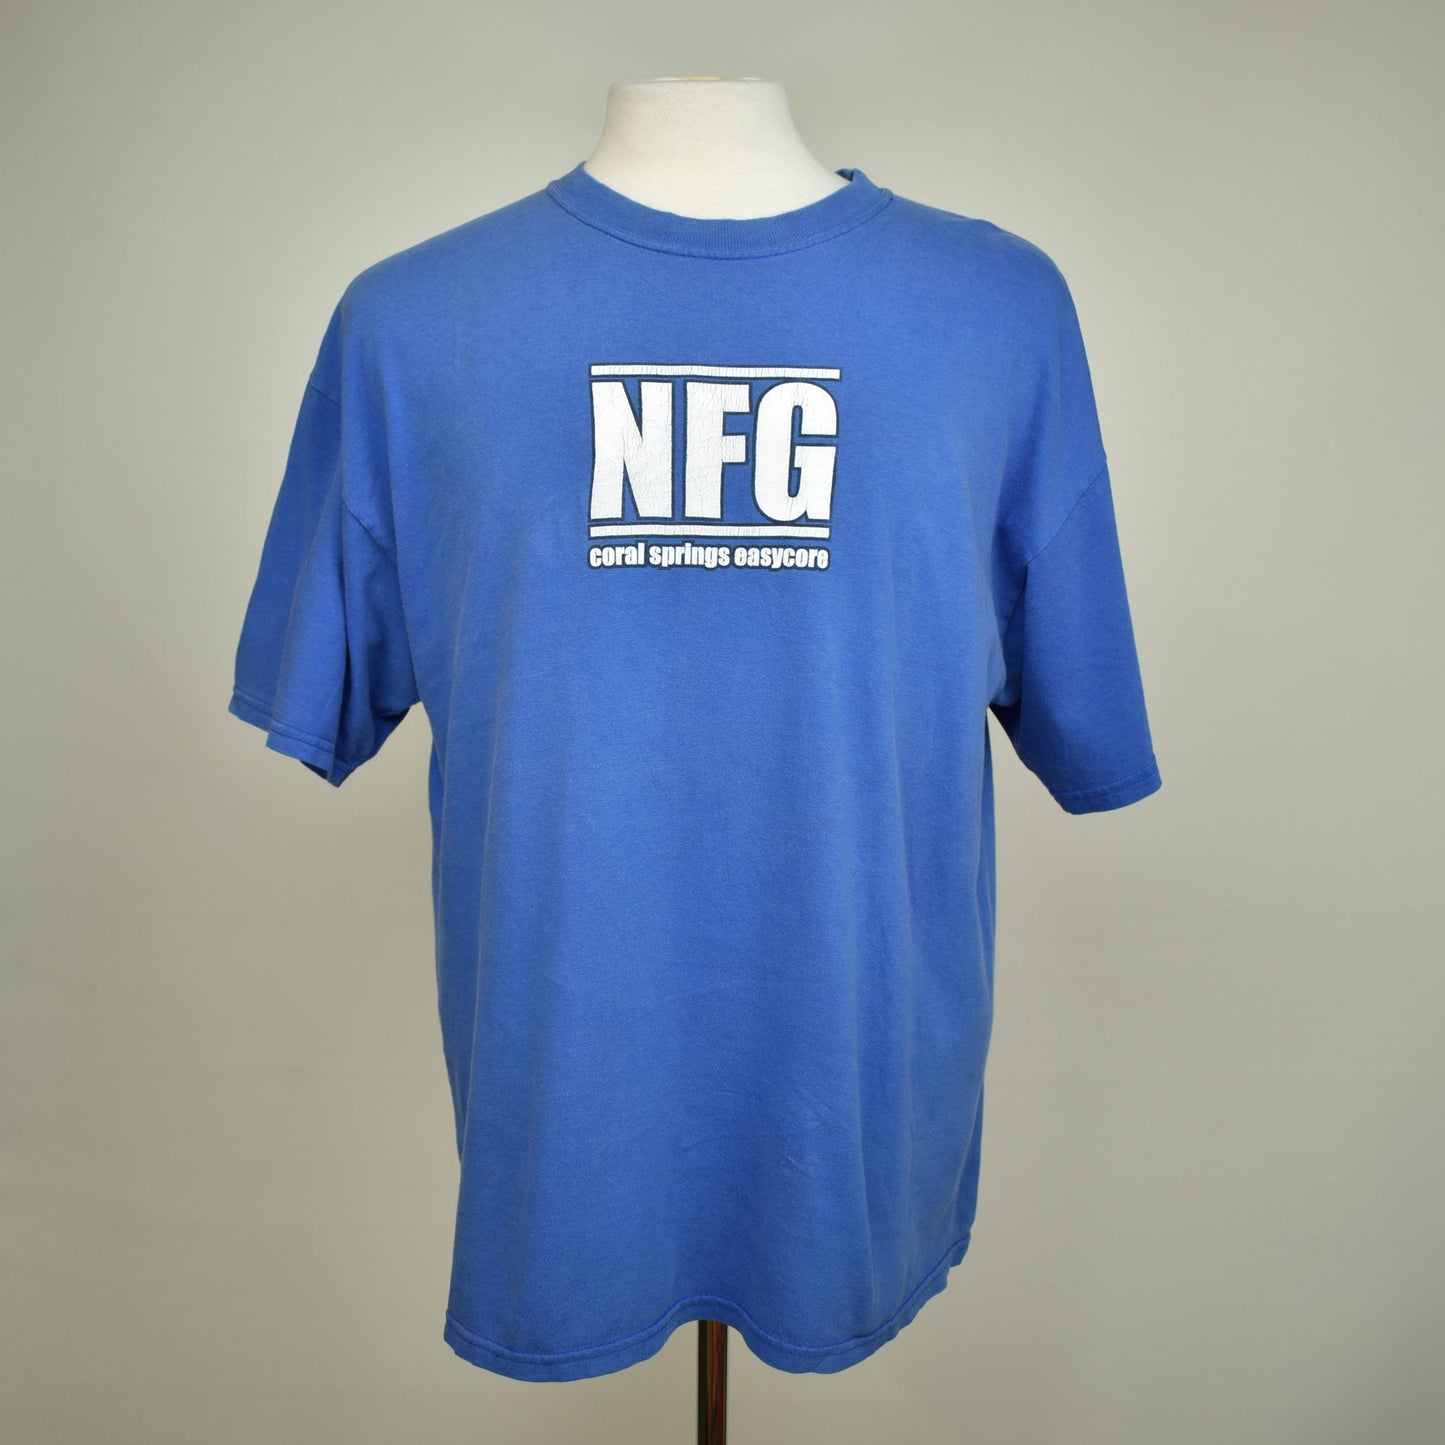 Vintage New Found Glory T-shirt - Coral Springs Easycore - 00s 90s Rock Tee